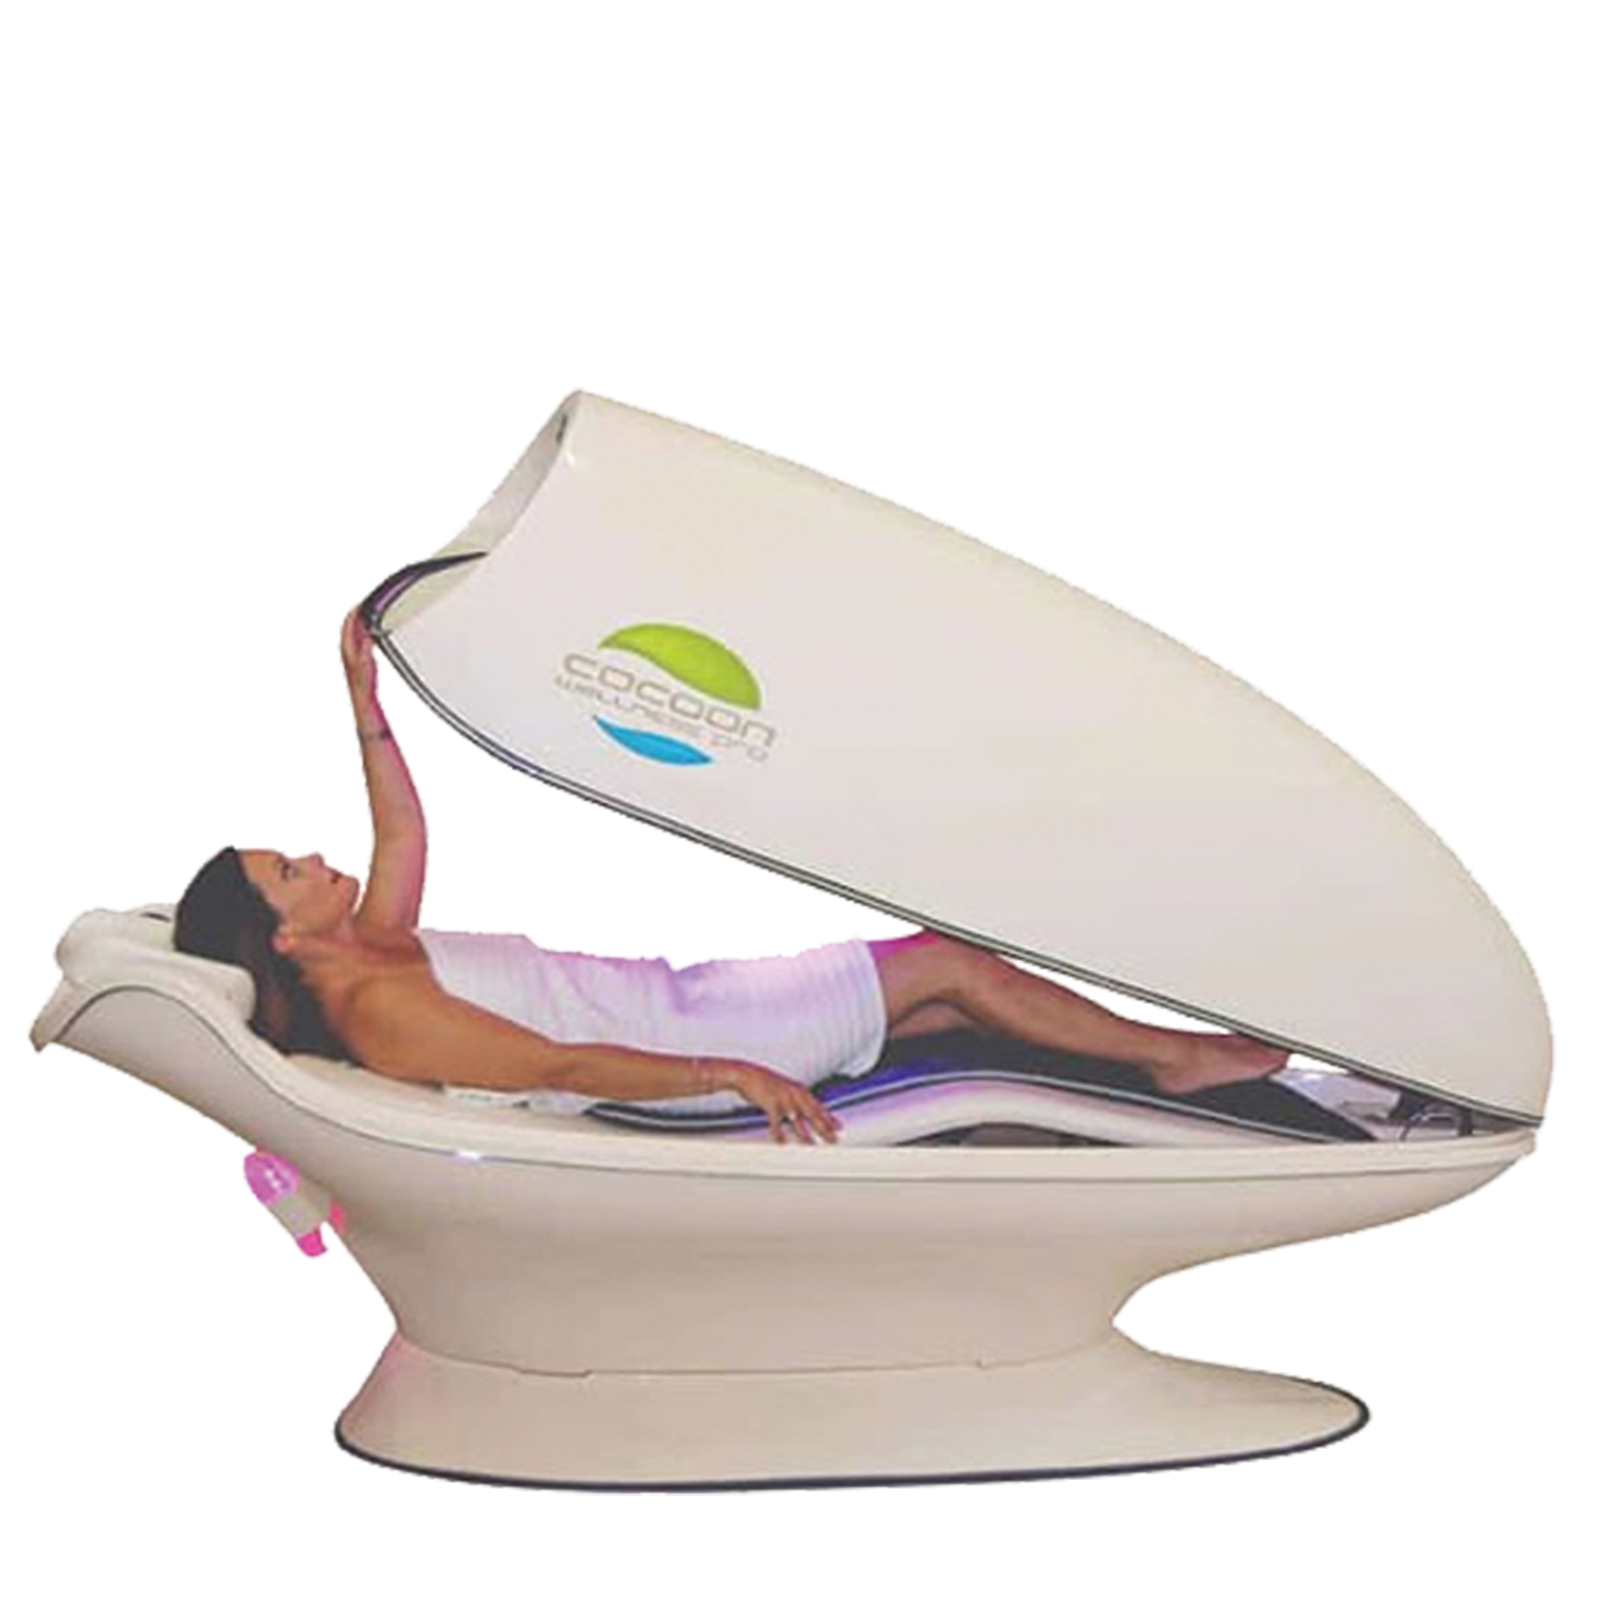 wellness pro cocoon pod with woman